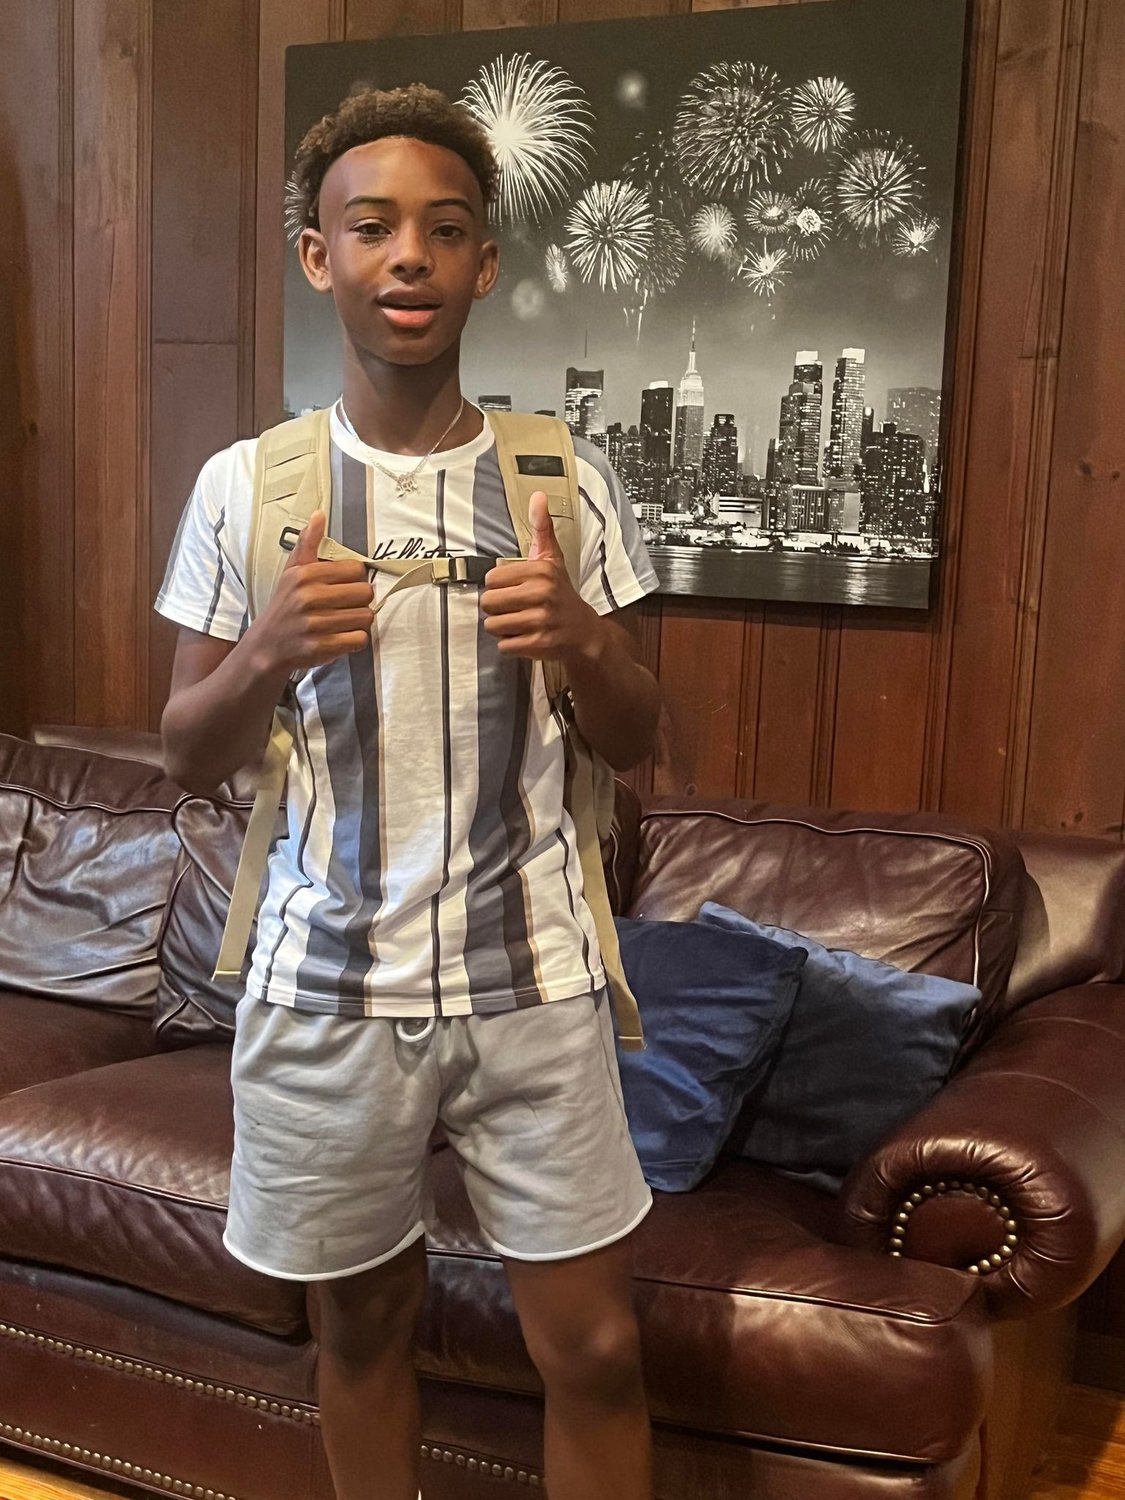 Their cousin, Marquises Miles, also headed to Center Moriches Middle School for grade 8 and is a
varsity soccer player!